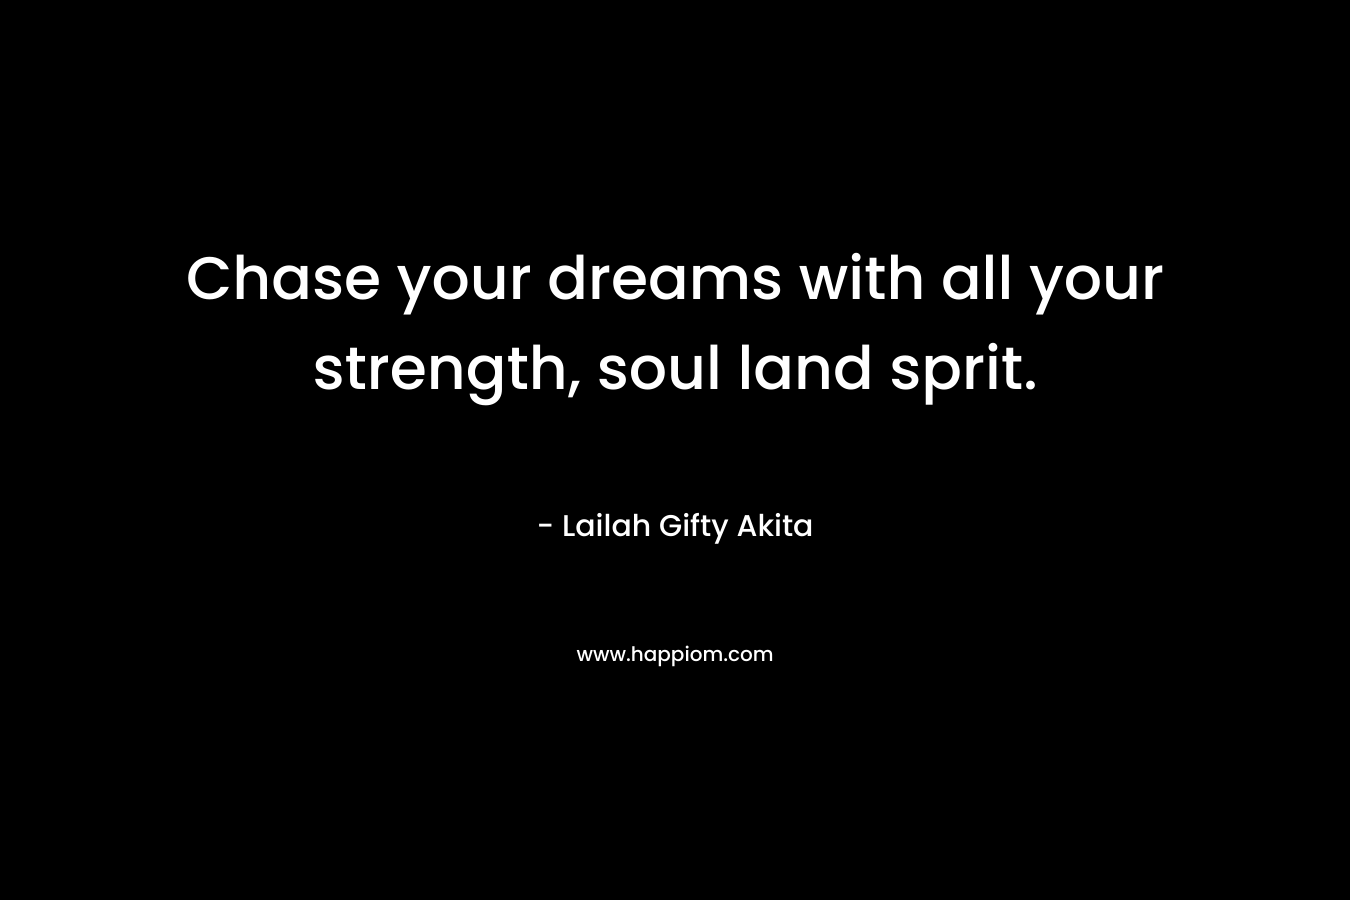 Chase your dreams with all your strength, soul land sprit.